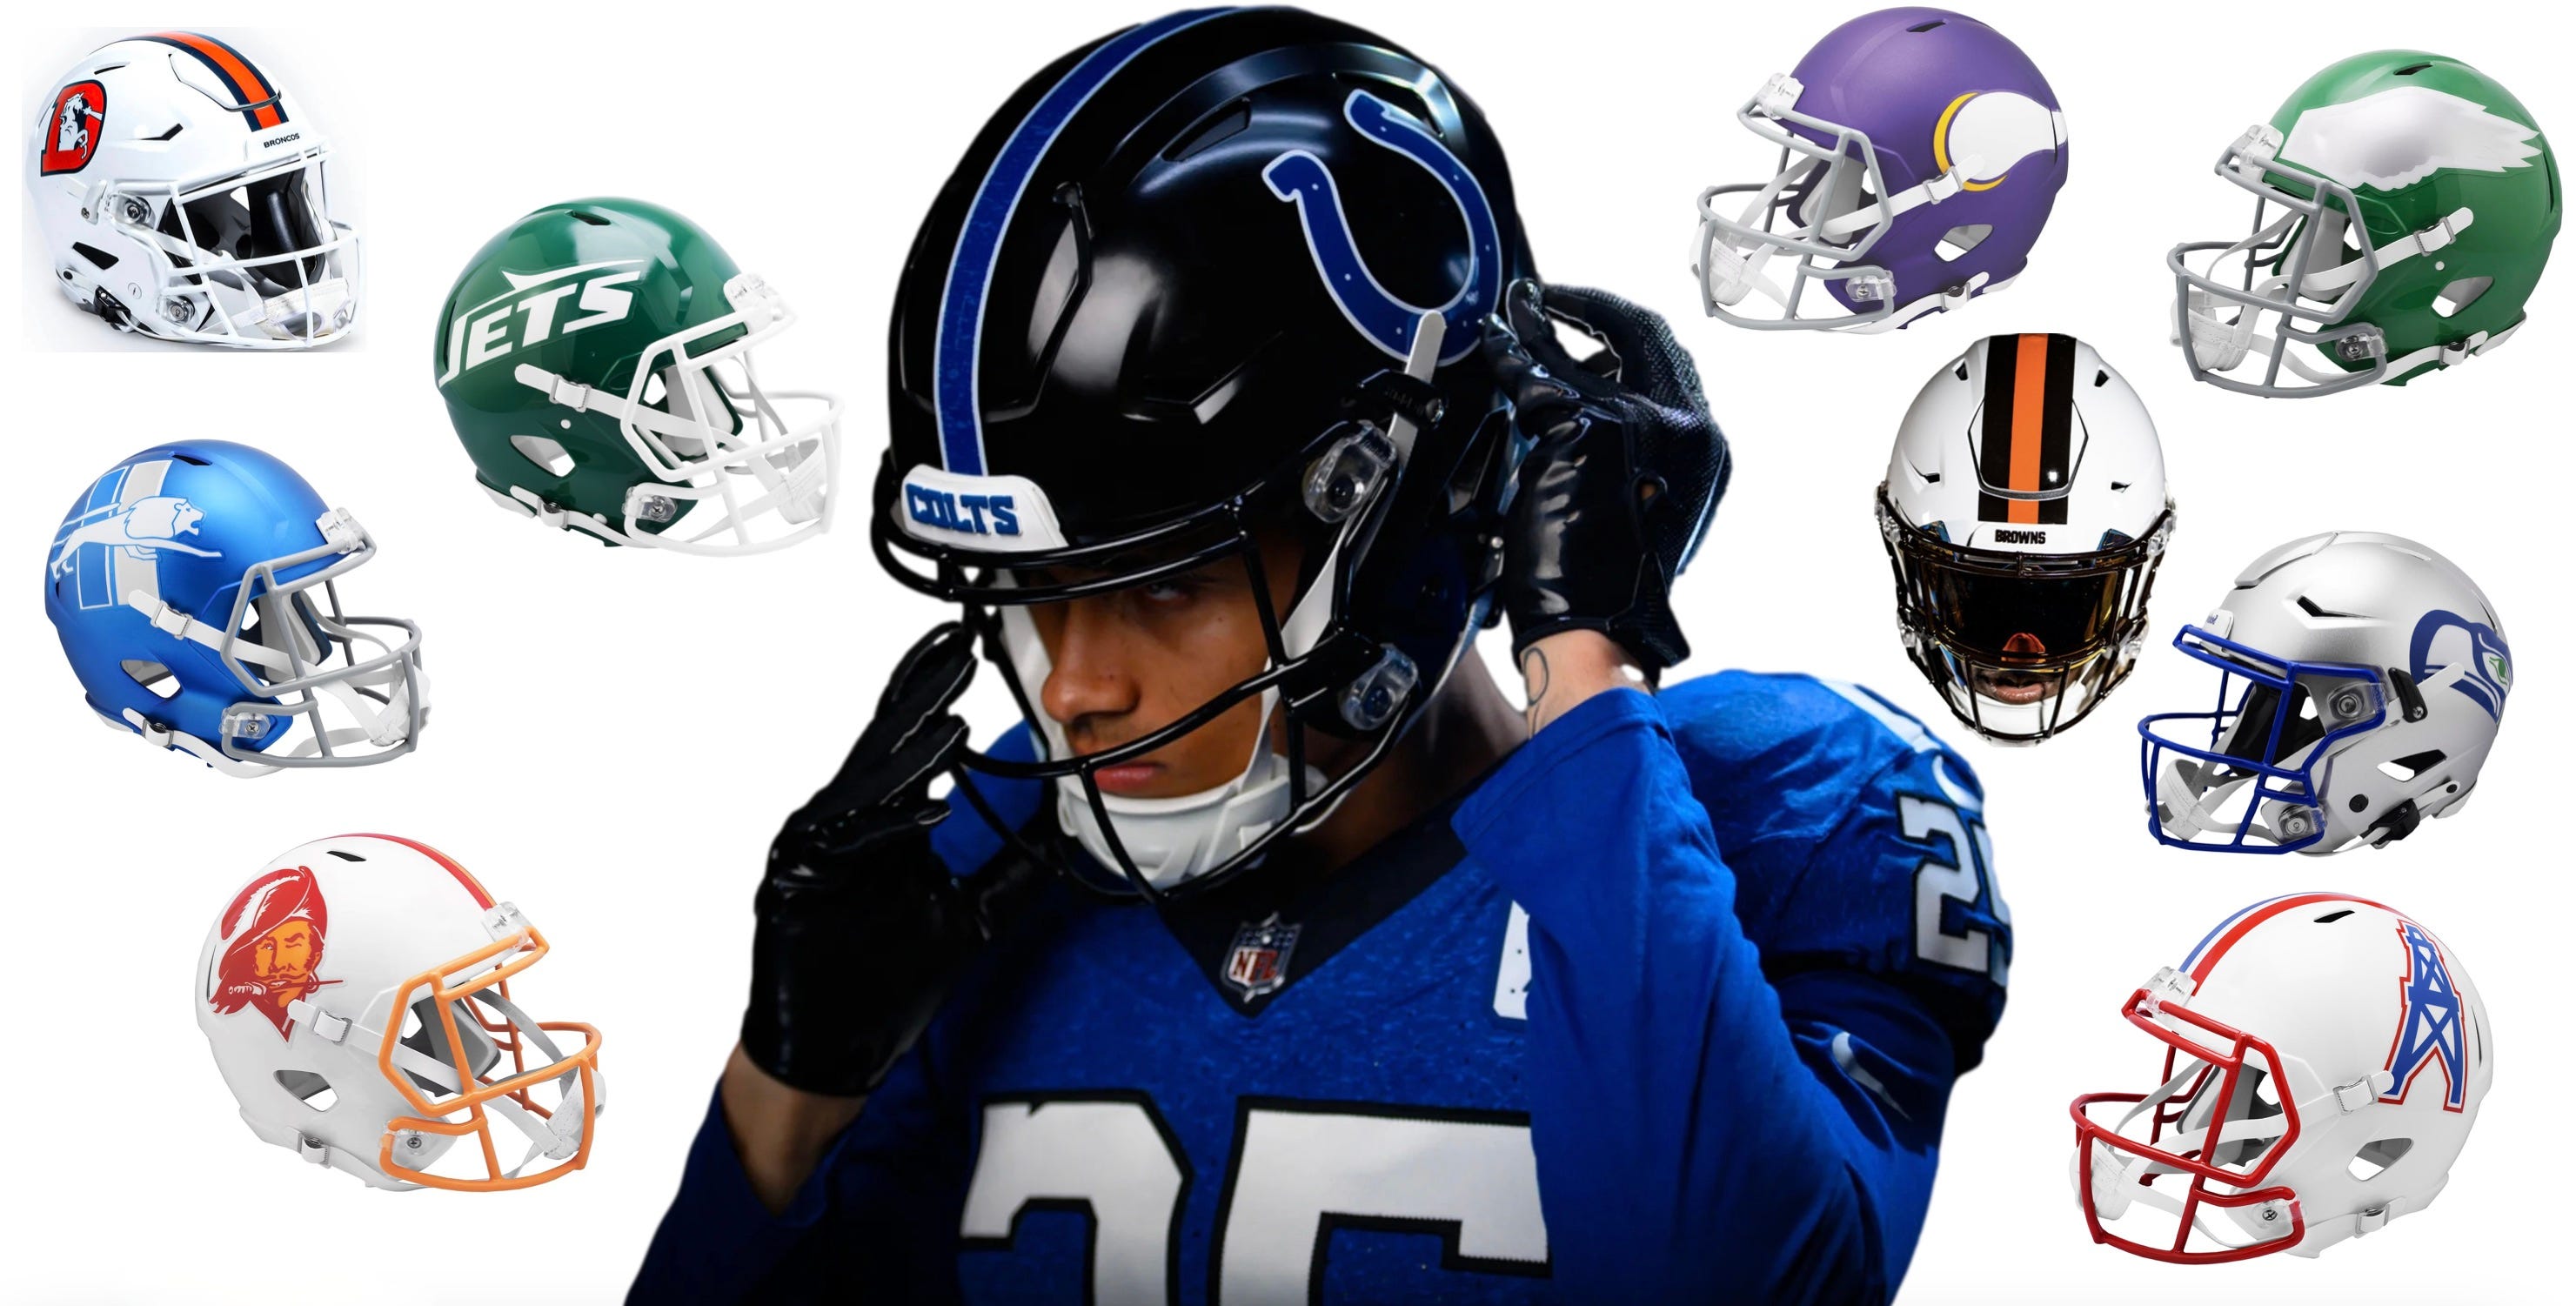 Uni Watch Power Rankings for the NFL's New Throwback and Alternate Uniforms